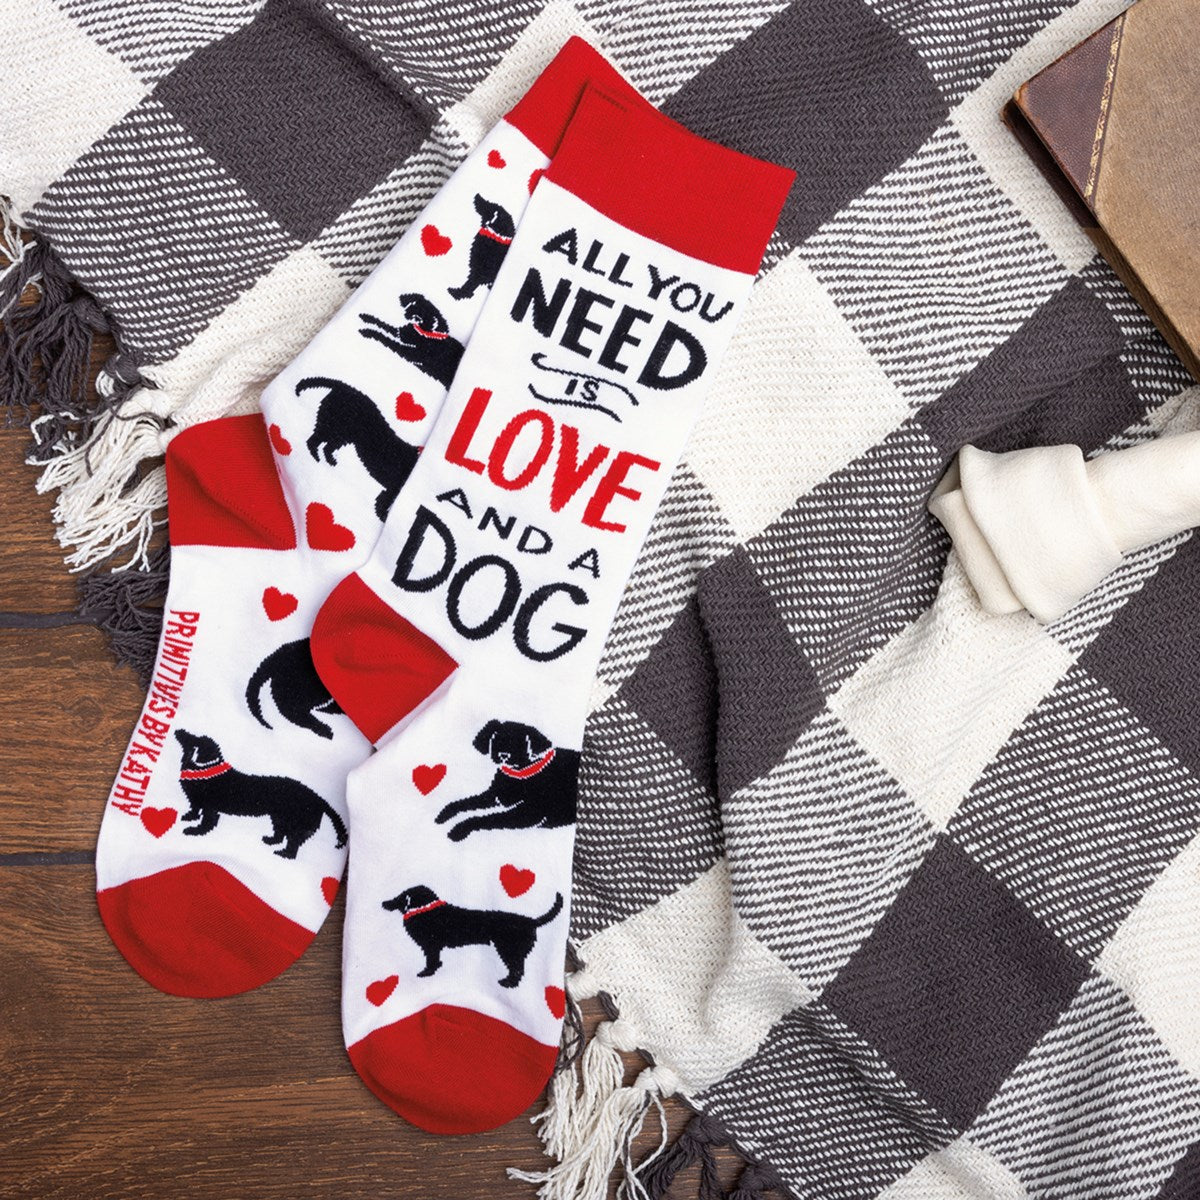 All You Need Is Love And A Dog Unisex Fun Socks